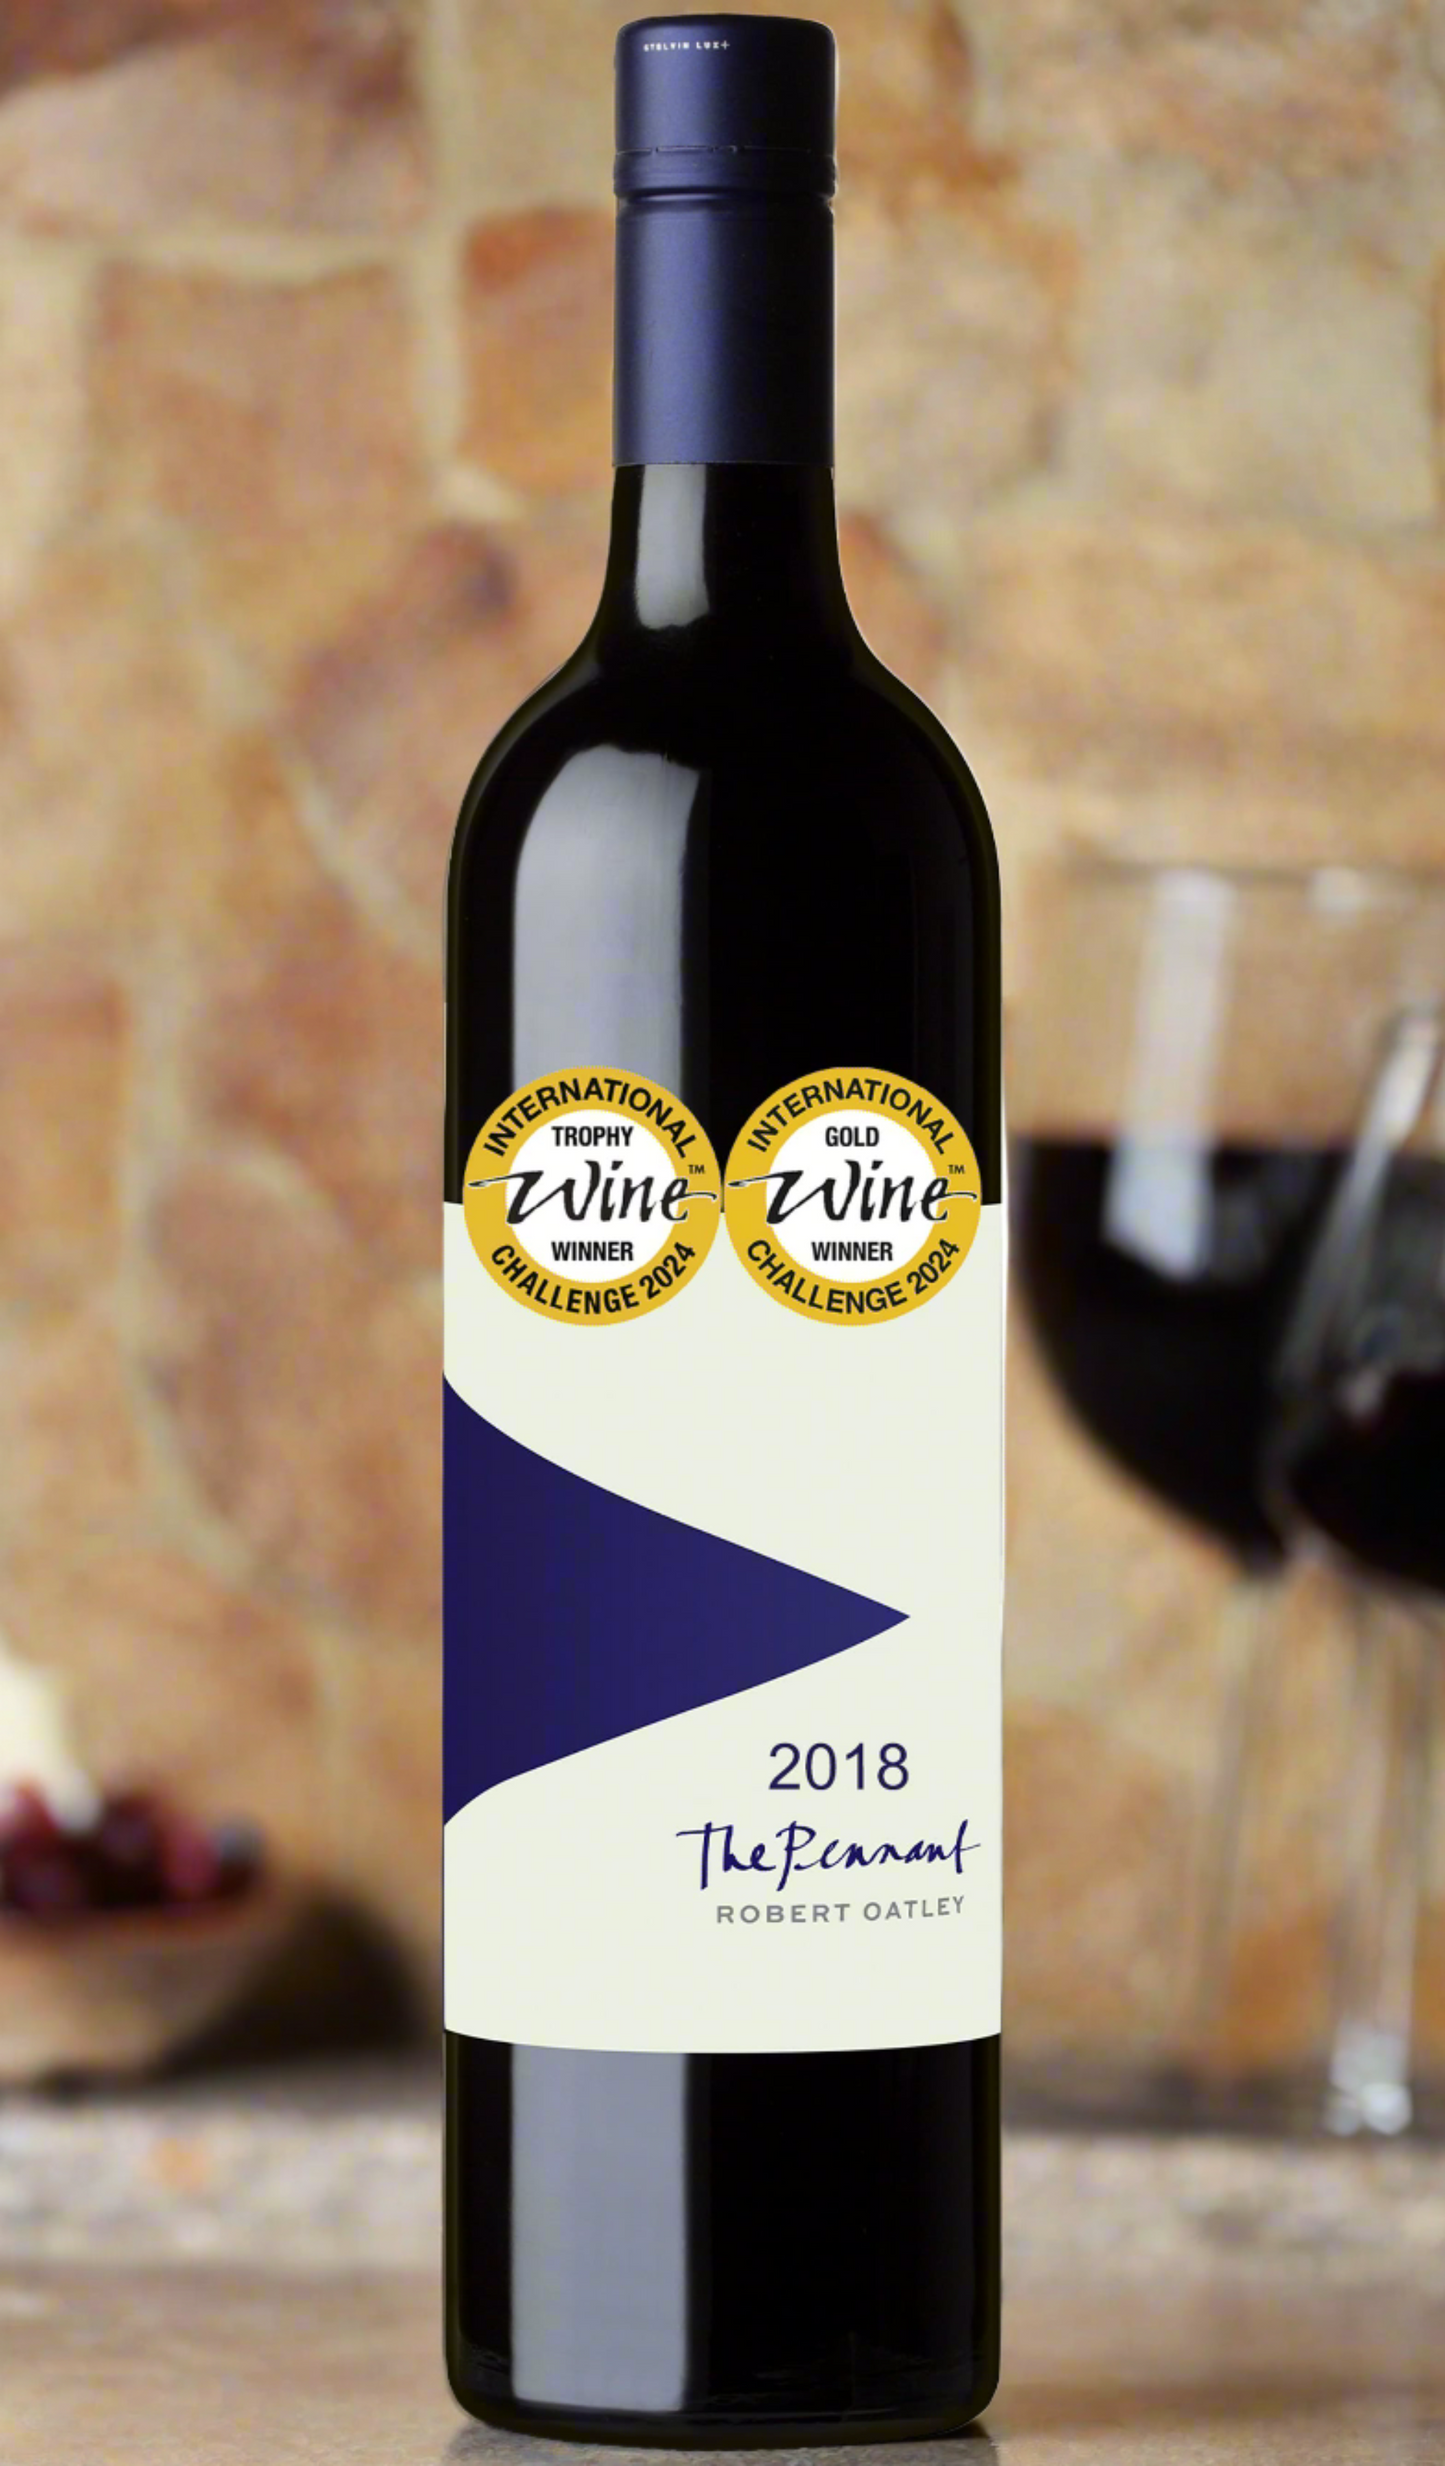 Find out more, explore the range and buy the award winning Robert Oatley Pennant Cabernet Sauvignon 2018 (Frankland River) available online at Wine Sellers Direct - Australia's independent liquor specialists.